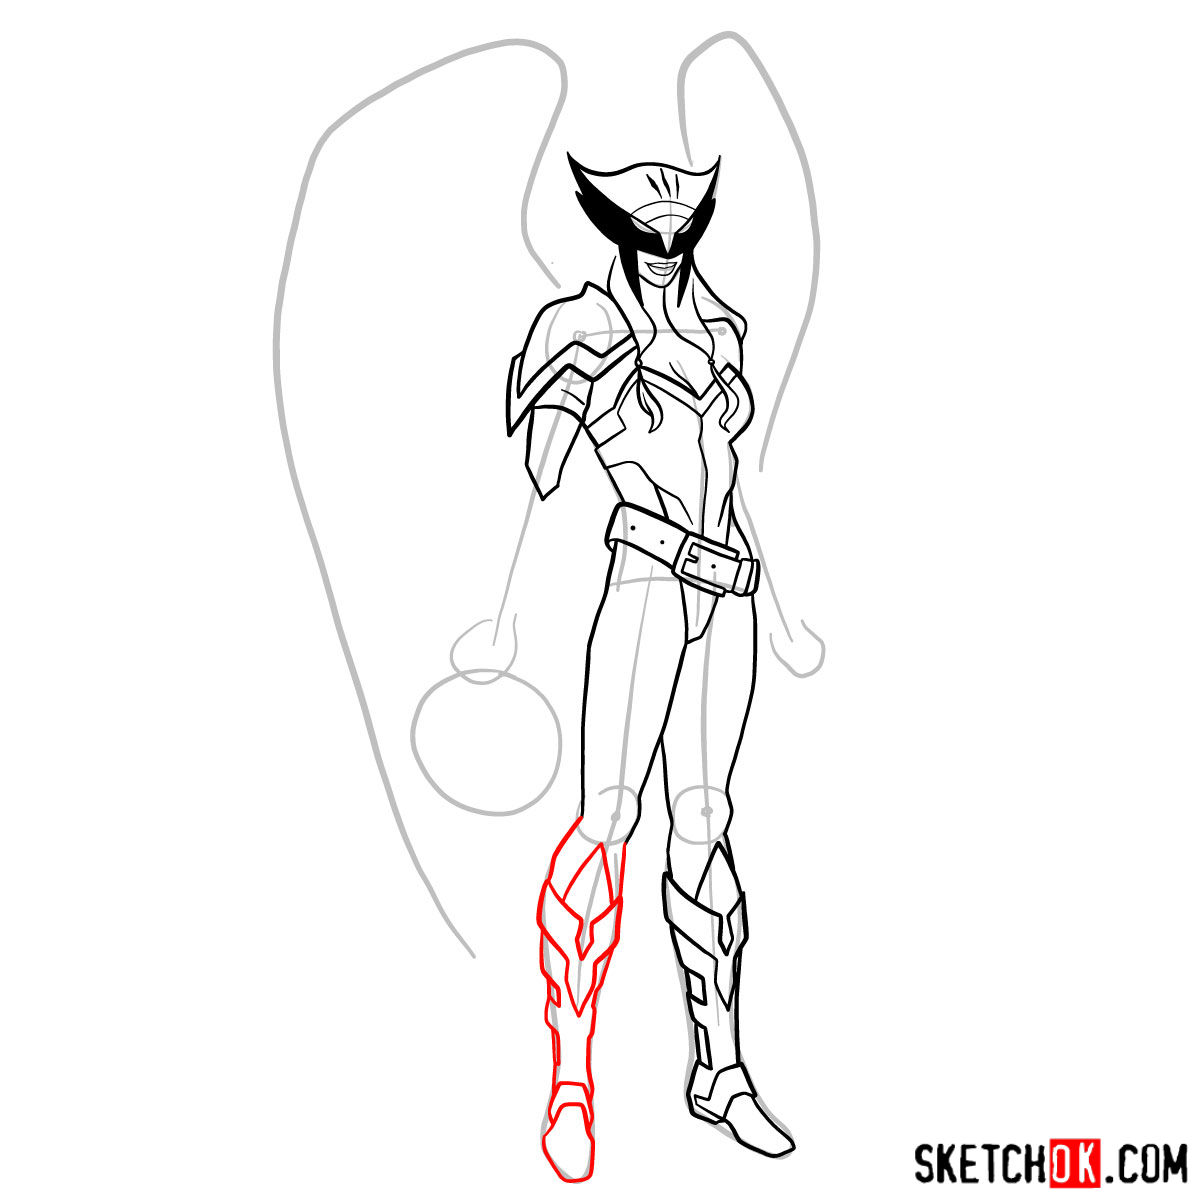 How to draw Hawkgirl DC superheroine - step 12